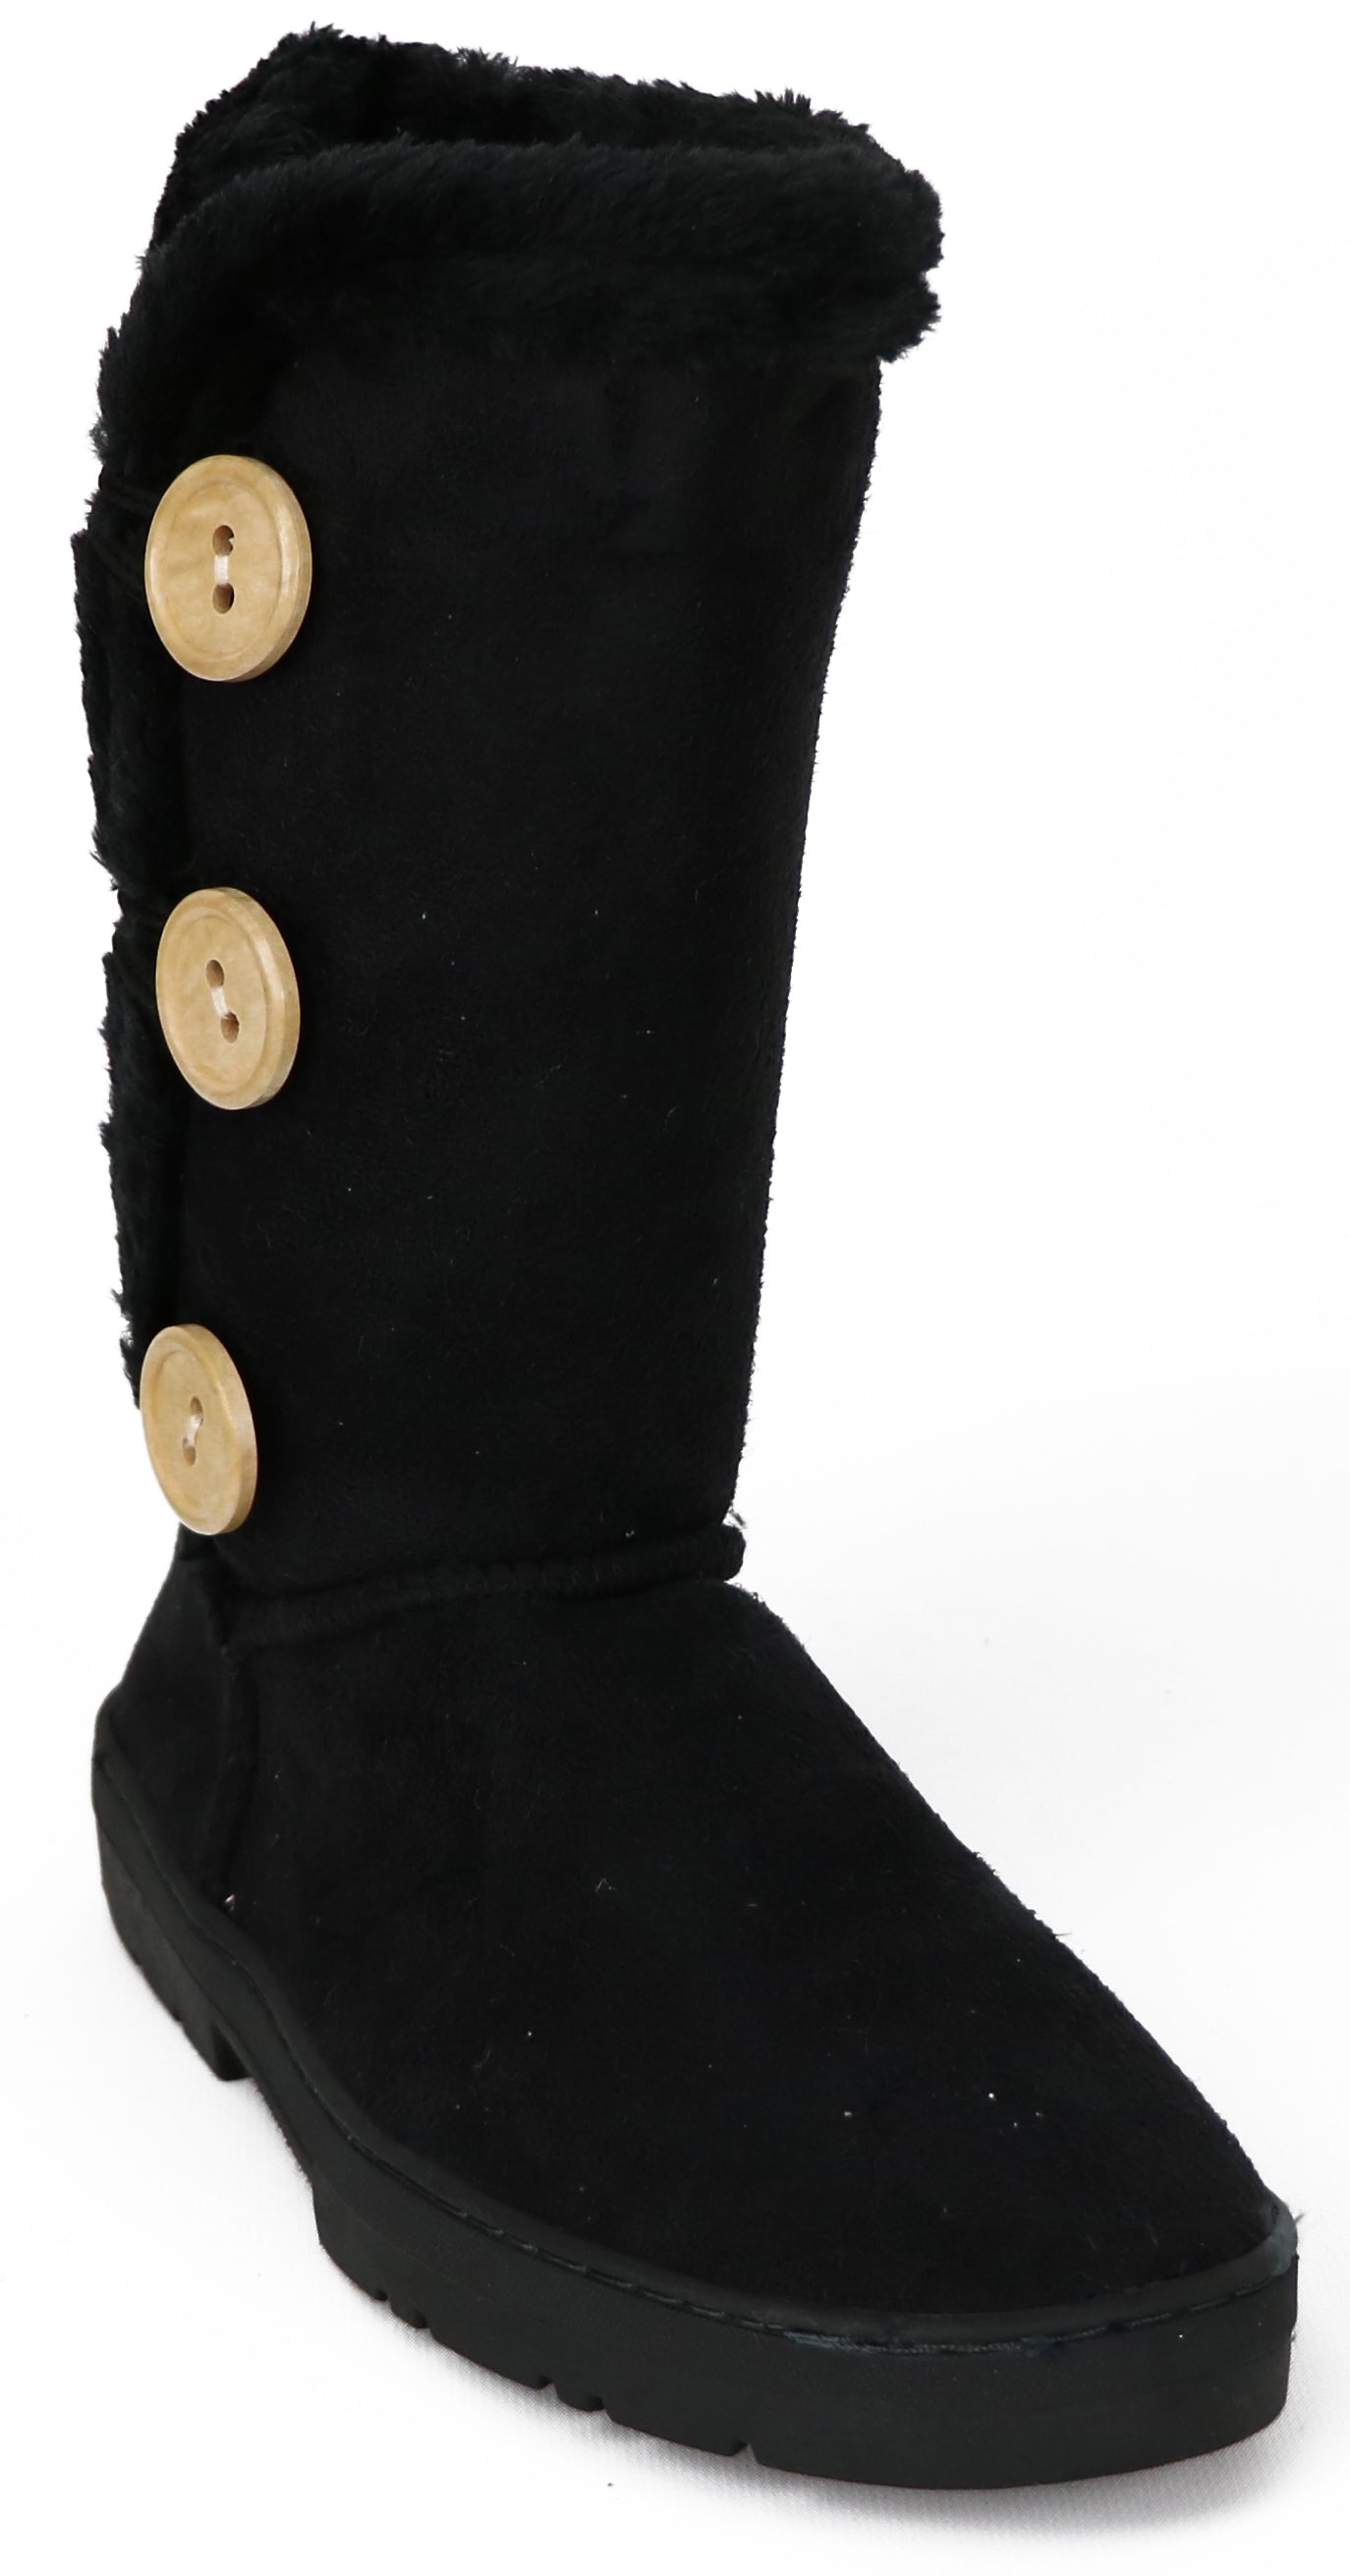 Chatz Womens Microsuede Button Boots